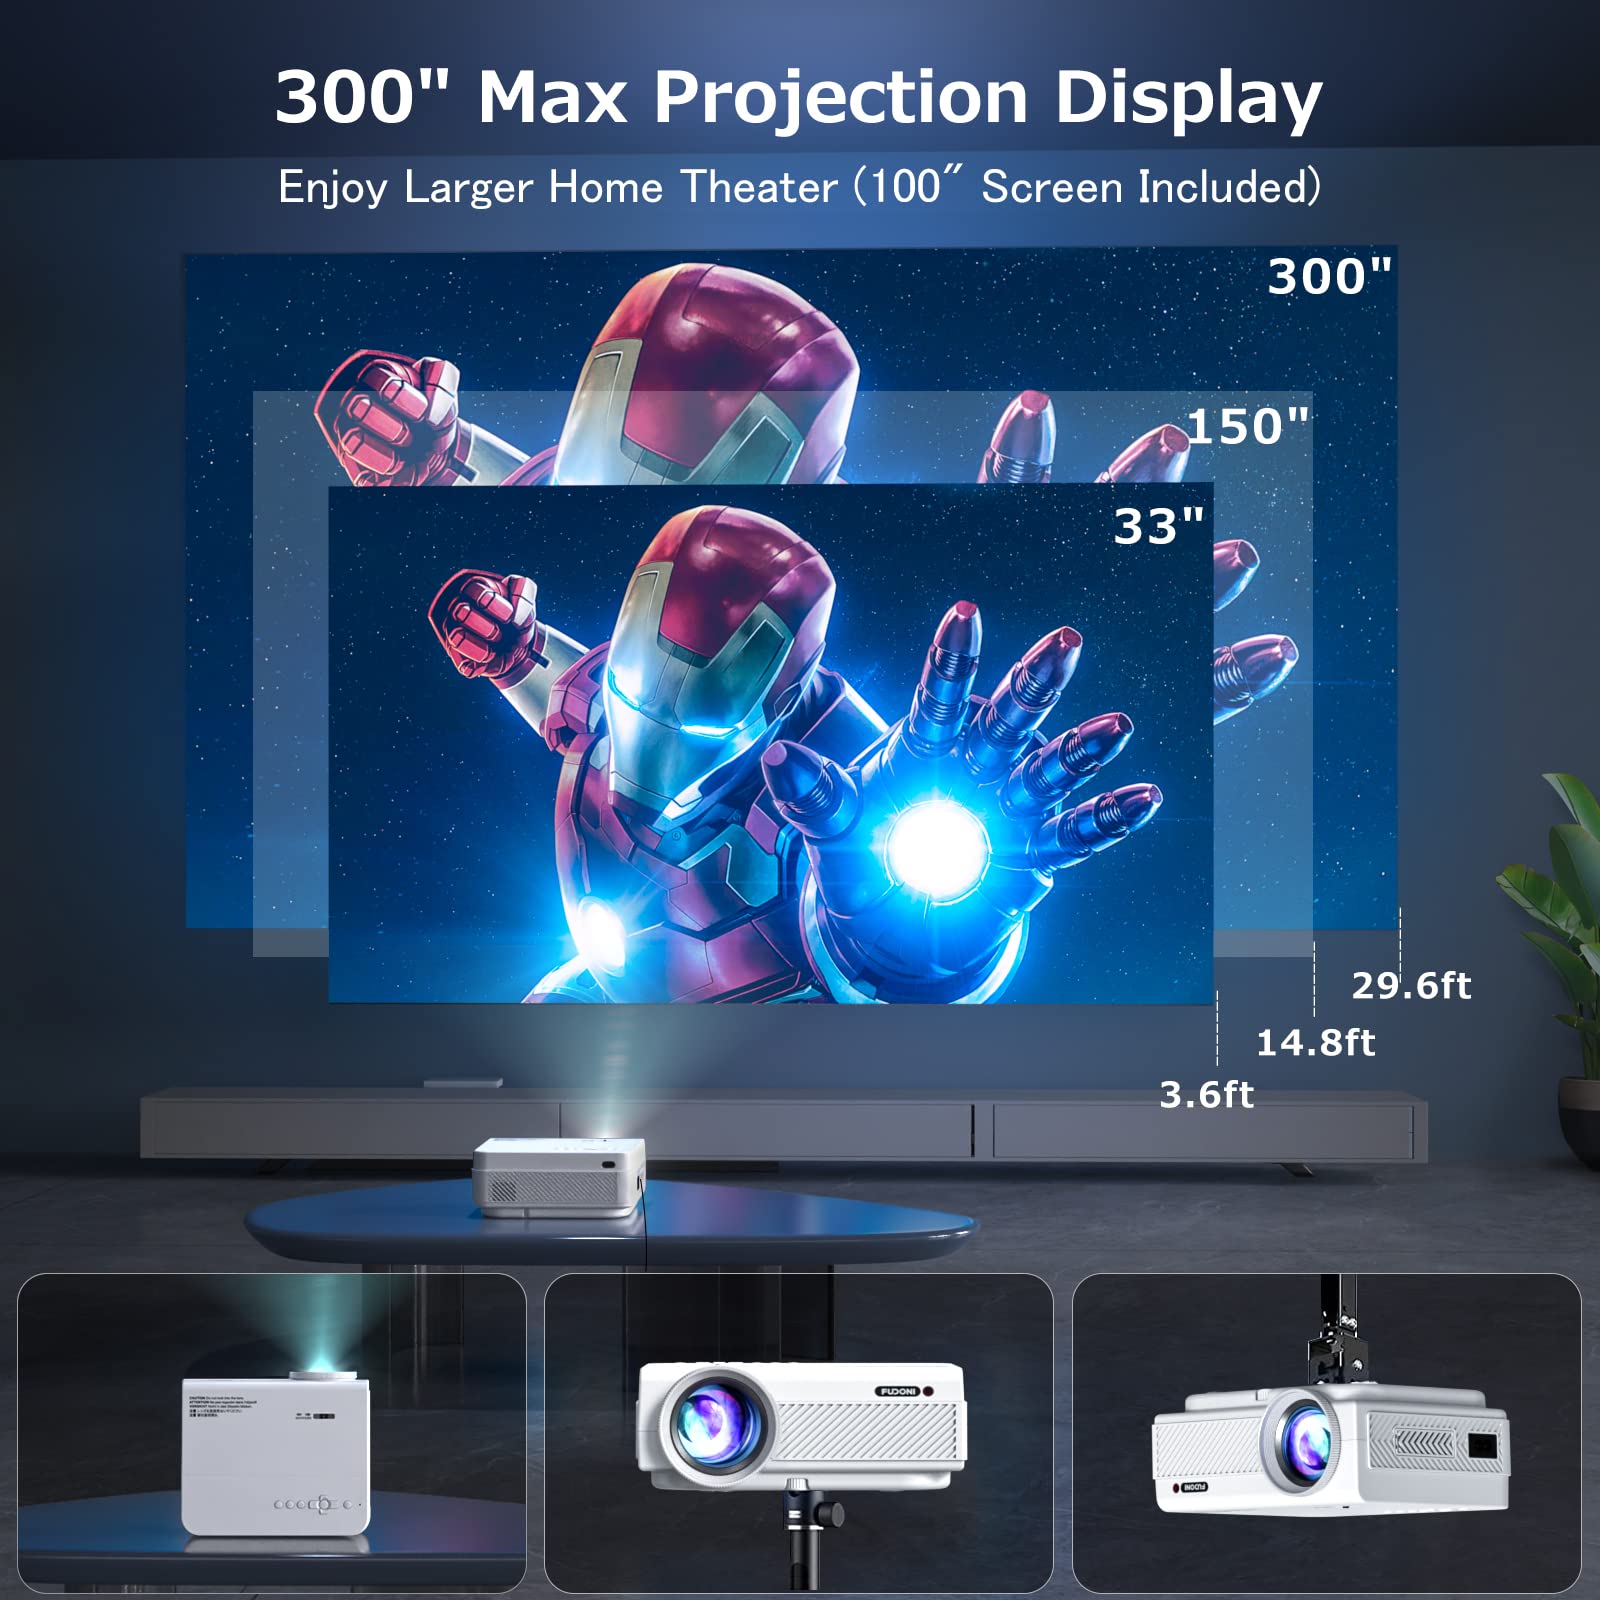 Projector with WiFi and Bluetooth, 5G WiFi Native 1080P 10000L 4K  Supported, FUDONI Portable Outdoor Projector with Screen for Home Theater